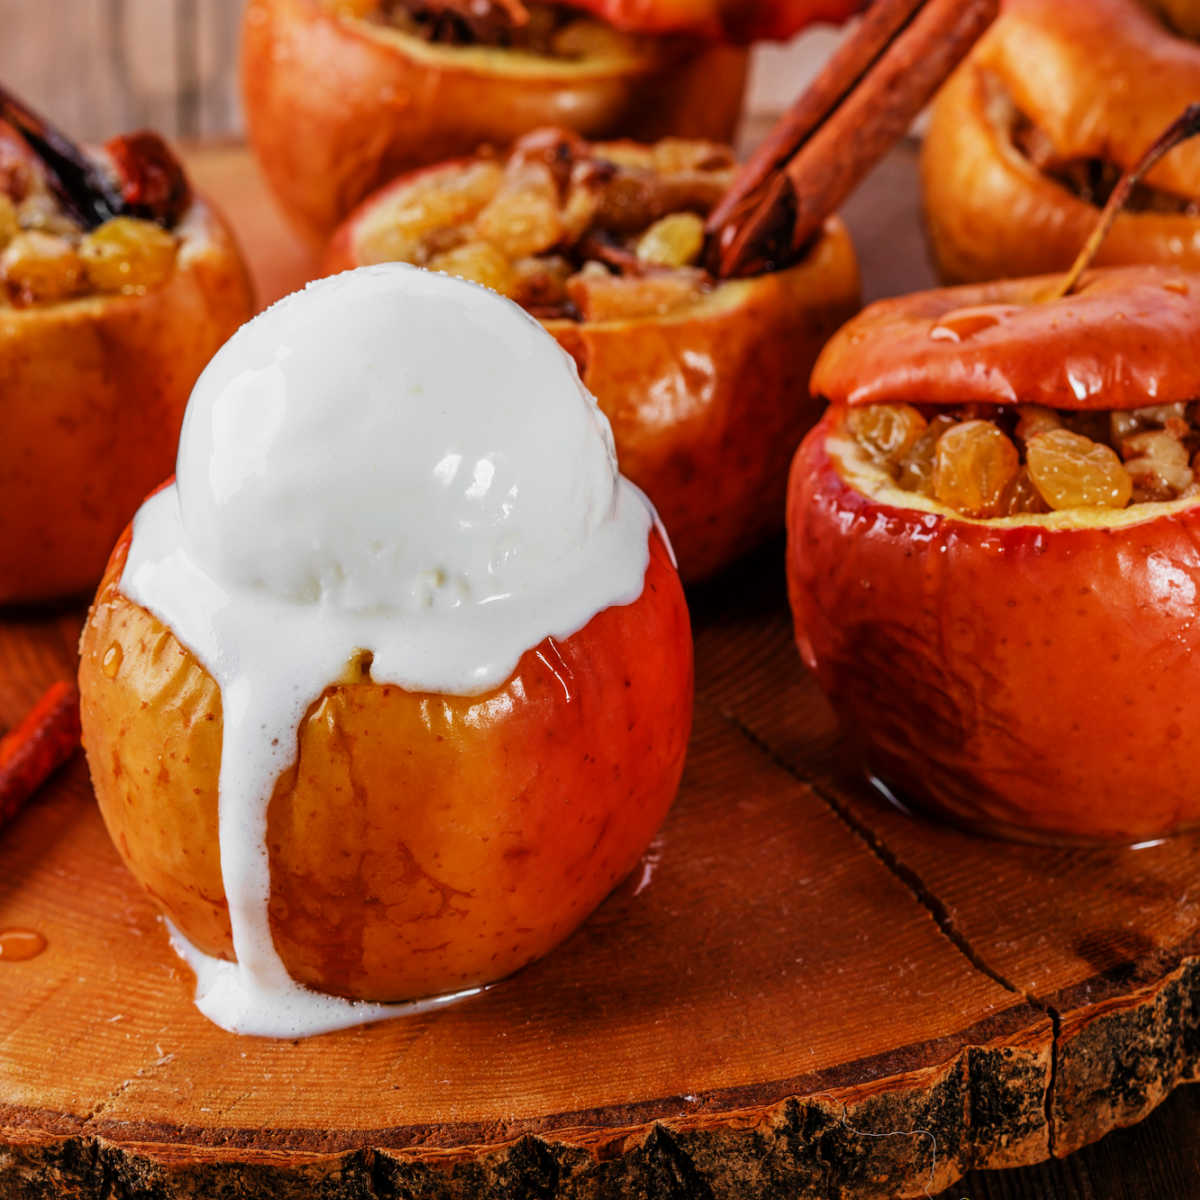 Baked stuffed apple topped with scoop of ice cream